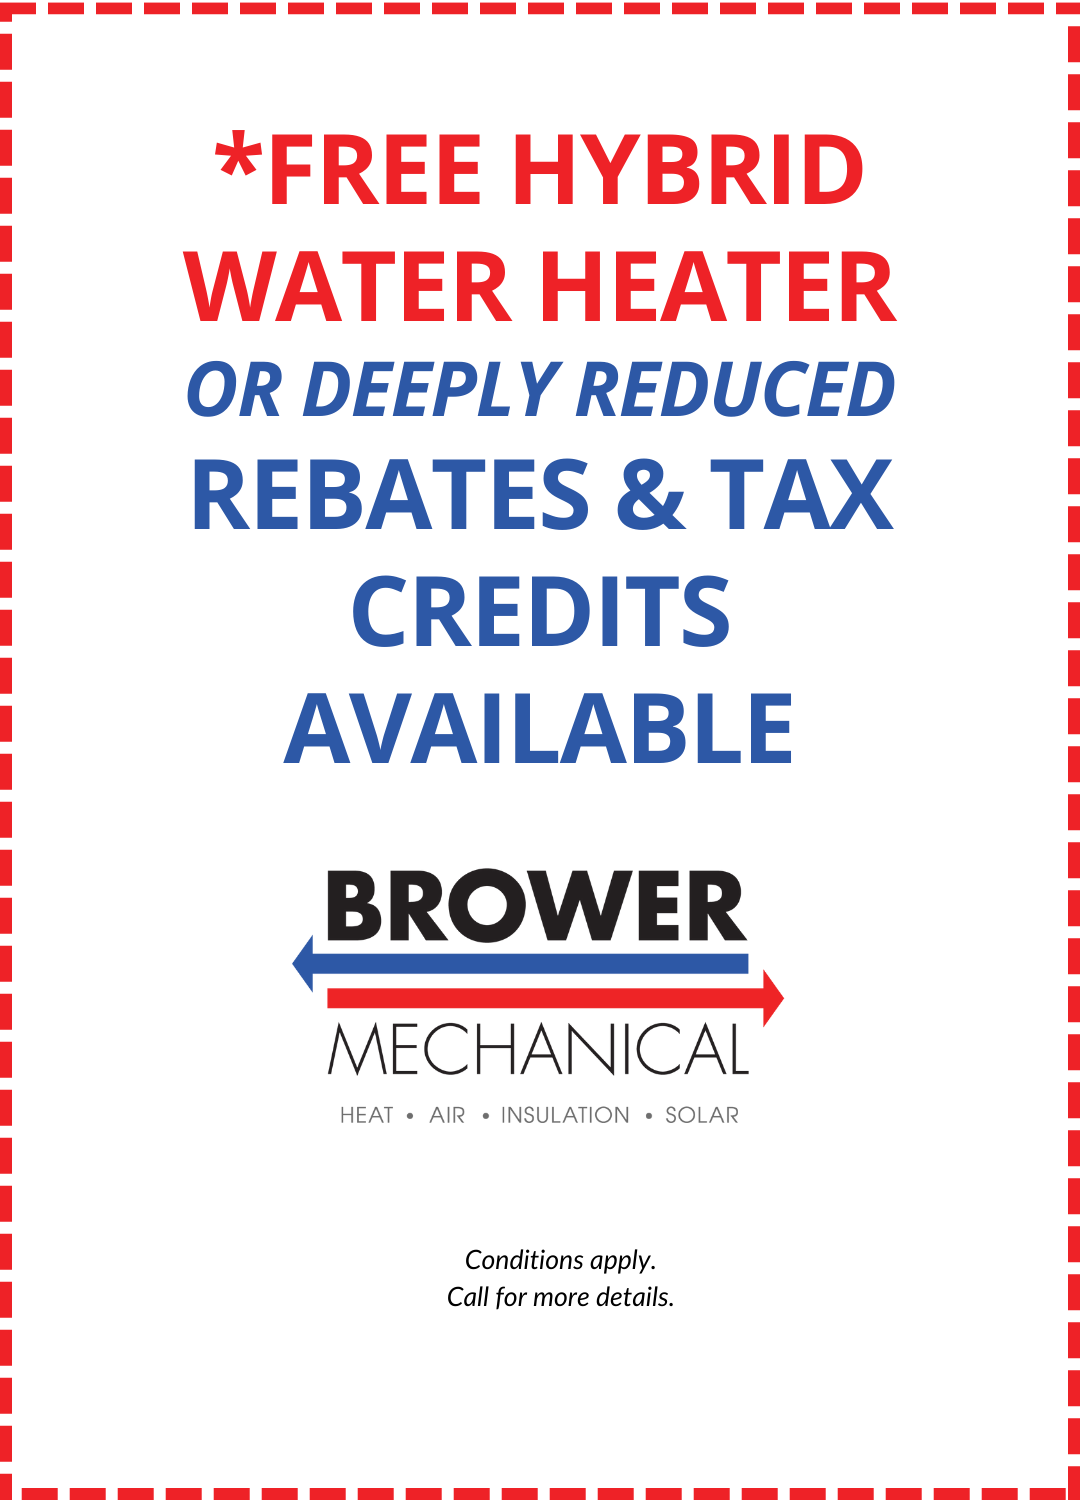 Free Hybrid Water Heater Special Brower Mechanical